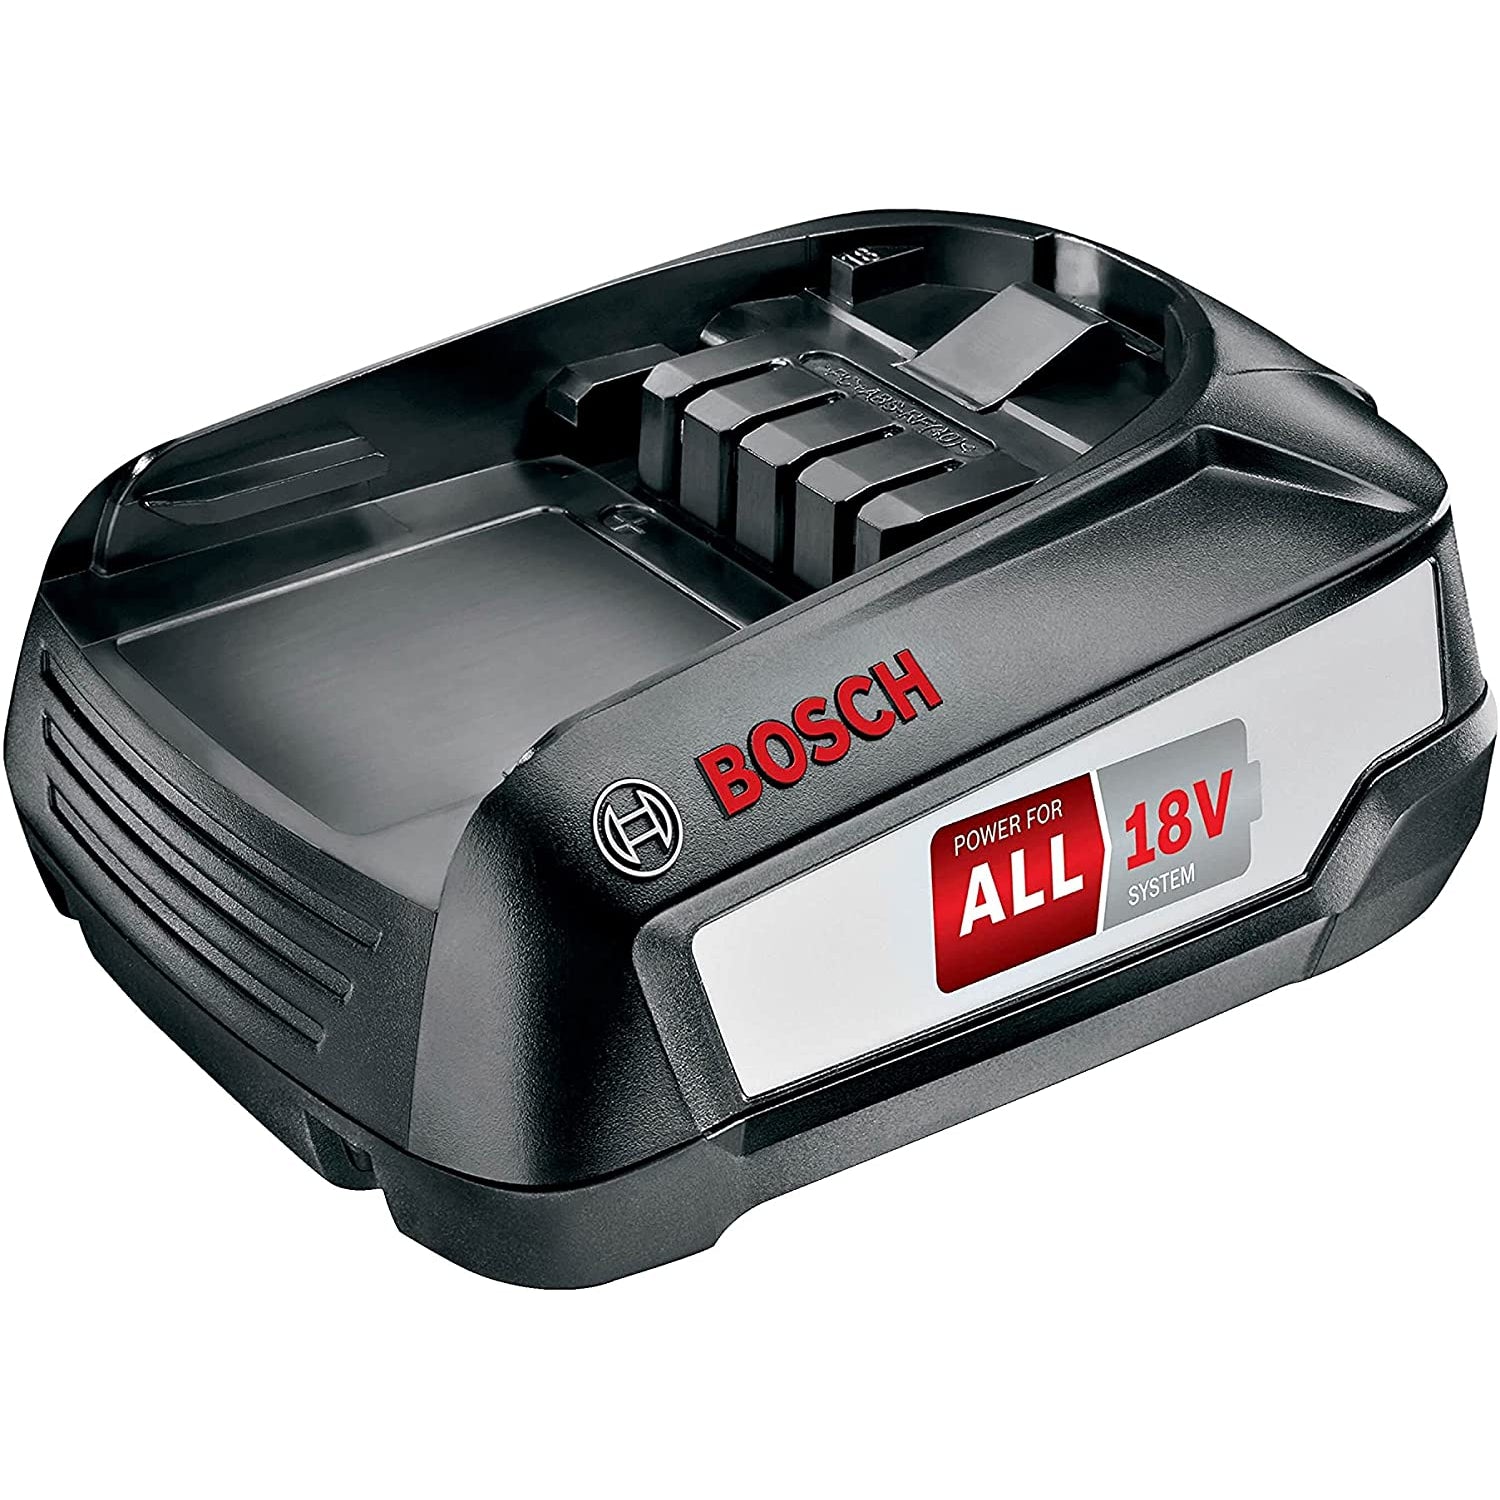 Bosch AL 1880 CV 18V Fast Charger plus Power for all 3.0 Ah 18V Replacement Battery